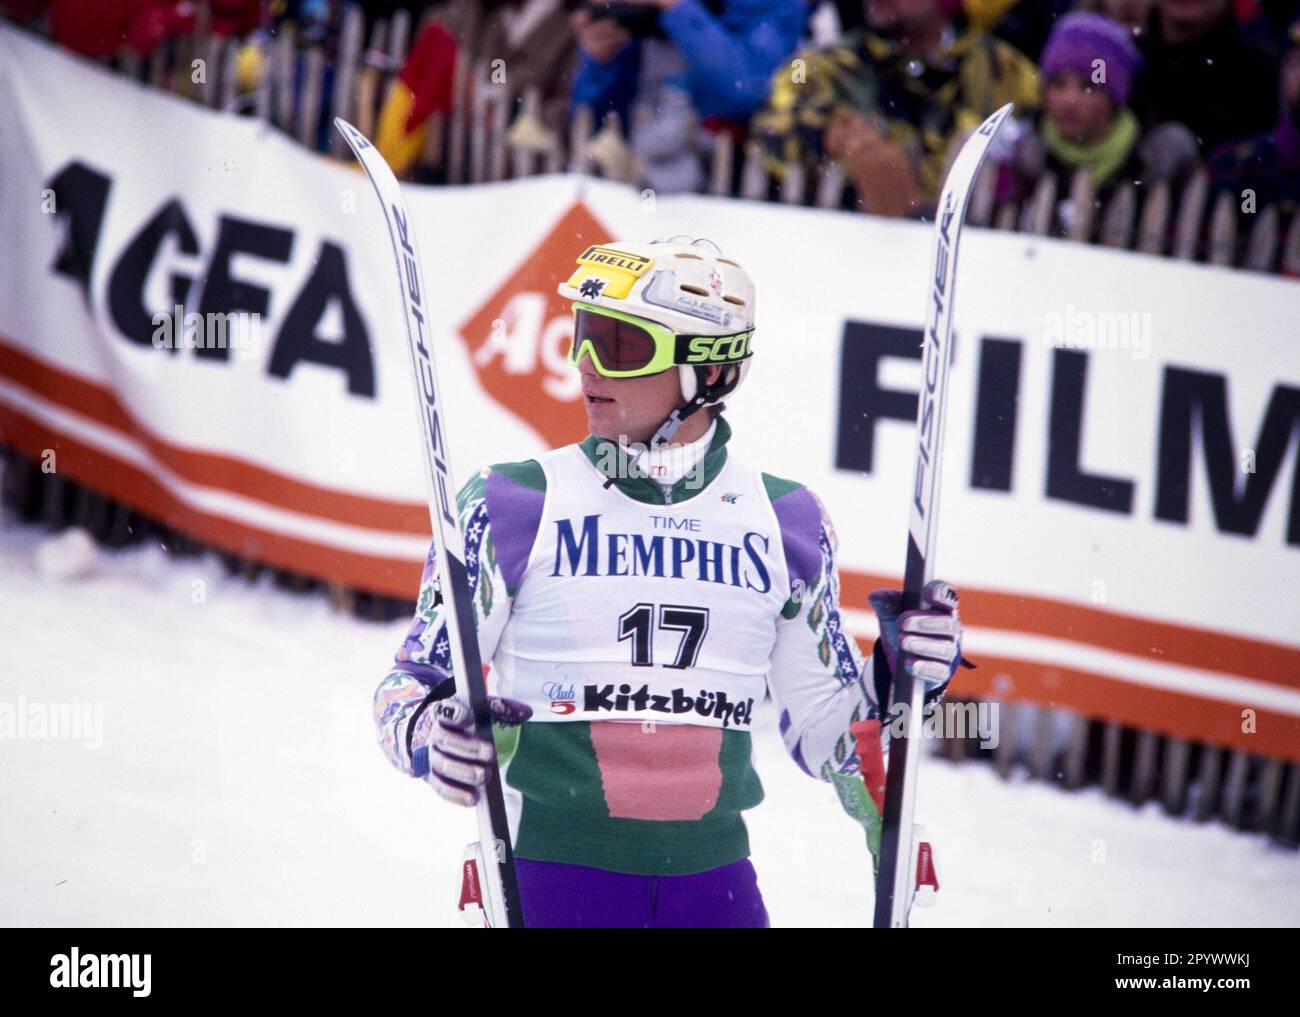 Alpine Skiing World Cup 1991/1992 Kitzbuehel Slalom 13.01.1991 Guenther MADER (Austria) PHOTO: WEREK Press Picture Agency xxNOxMODELxRELEASExx [automated translation]- AUSTRIA OUT Stock Photo